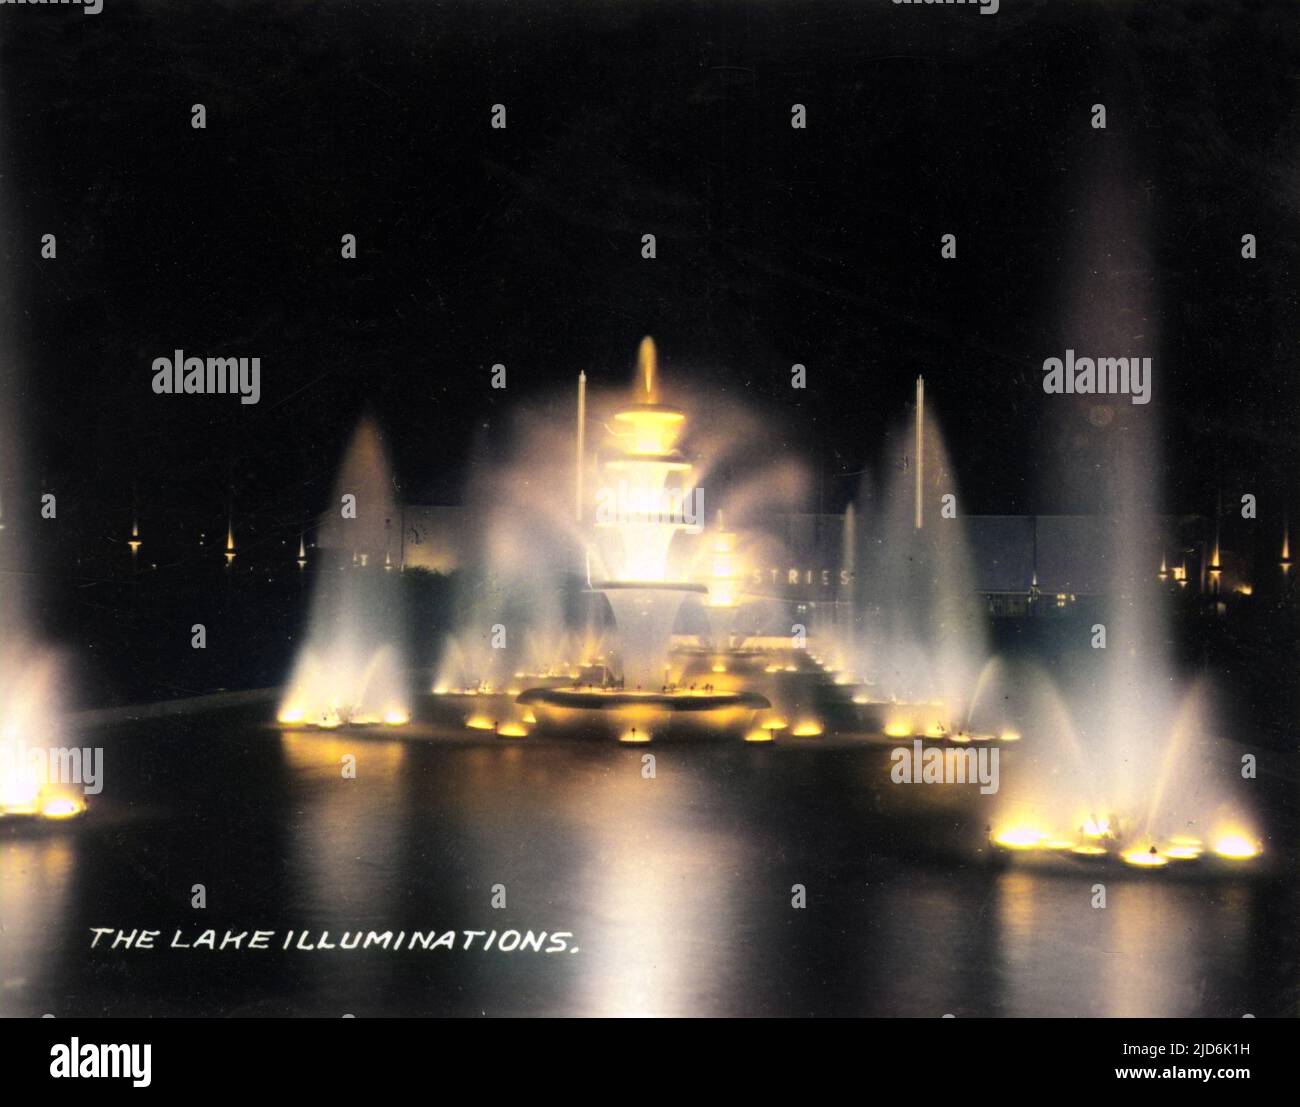 The Lake Illuminations - British Empire Exhibition - Glasgow, Scotland, (May - December 1938). The Exhibition was masterplanned by Thomas S. Tait, who headed of a team of nine architects, which included Basil Spence and Jack Coia. Colourised version of: 11007154       Date: 1938 Stock Photo